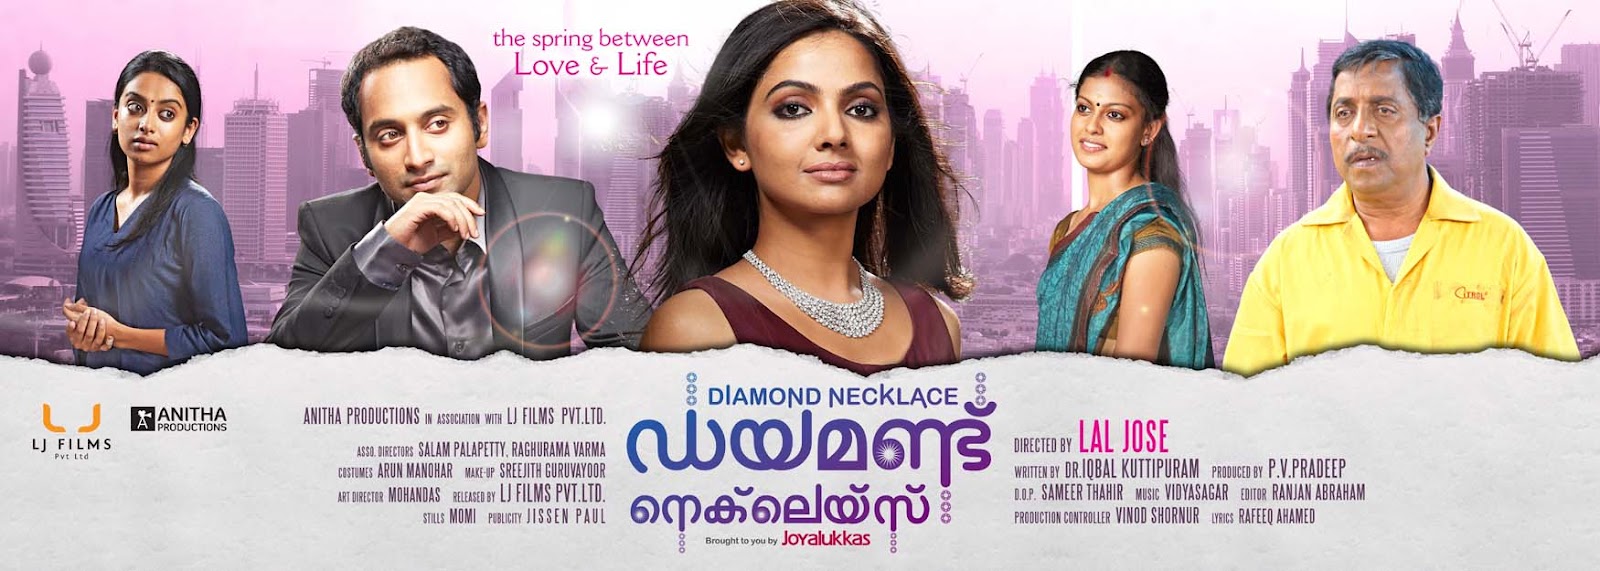 Diamond Necklace Full Movie Free Download